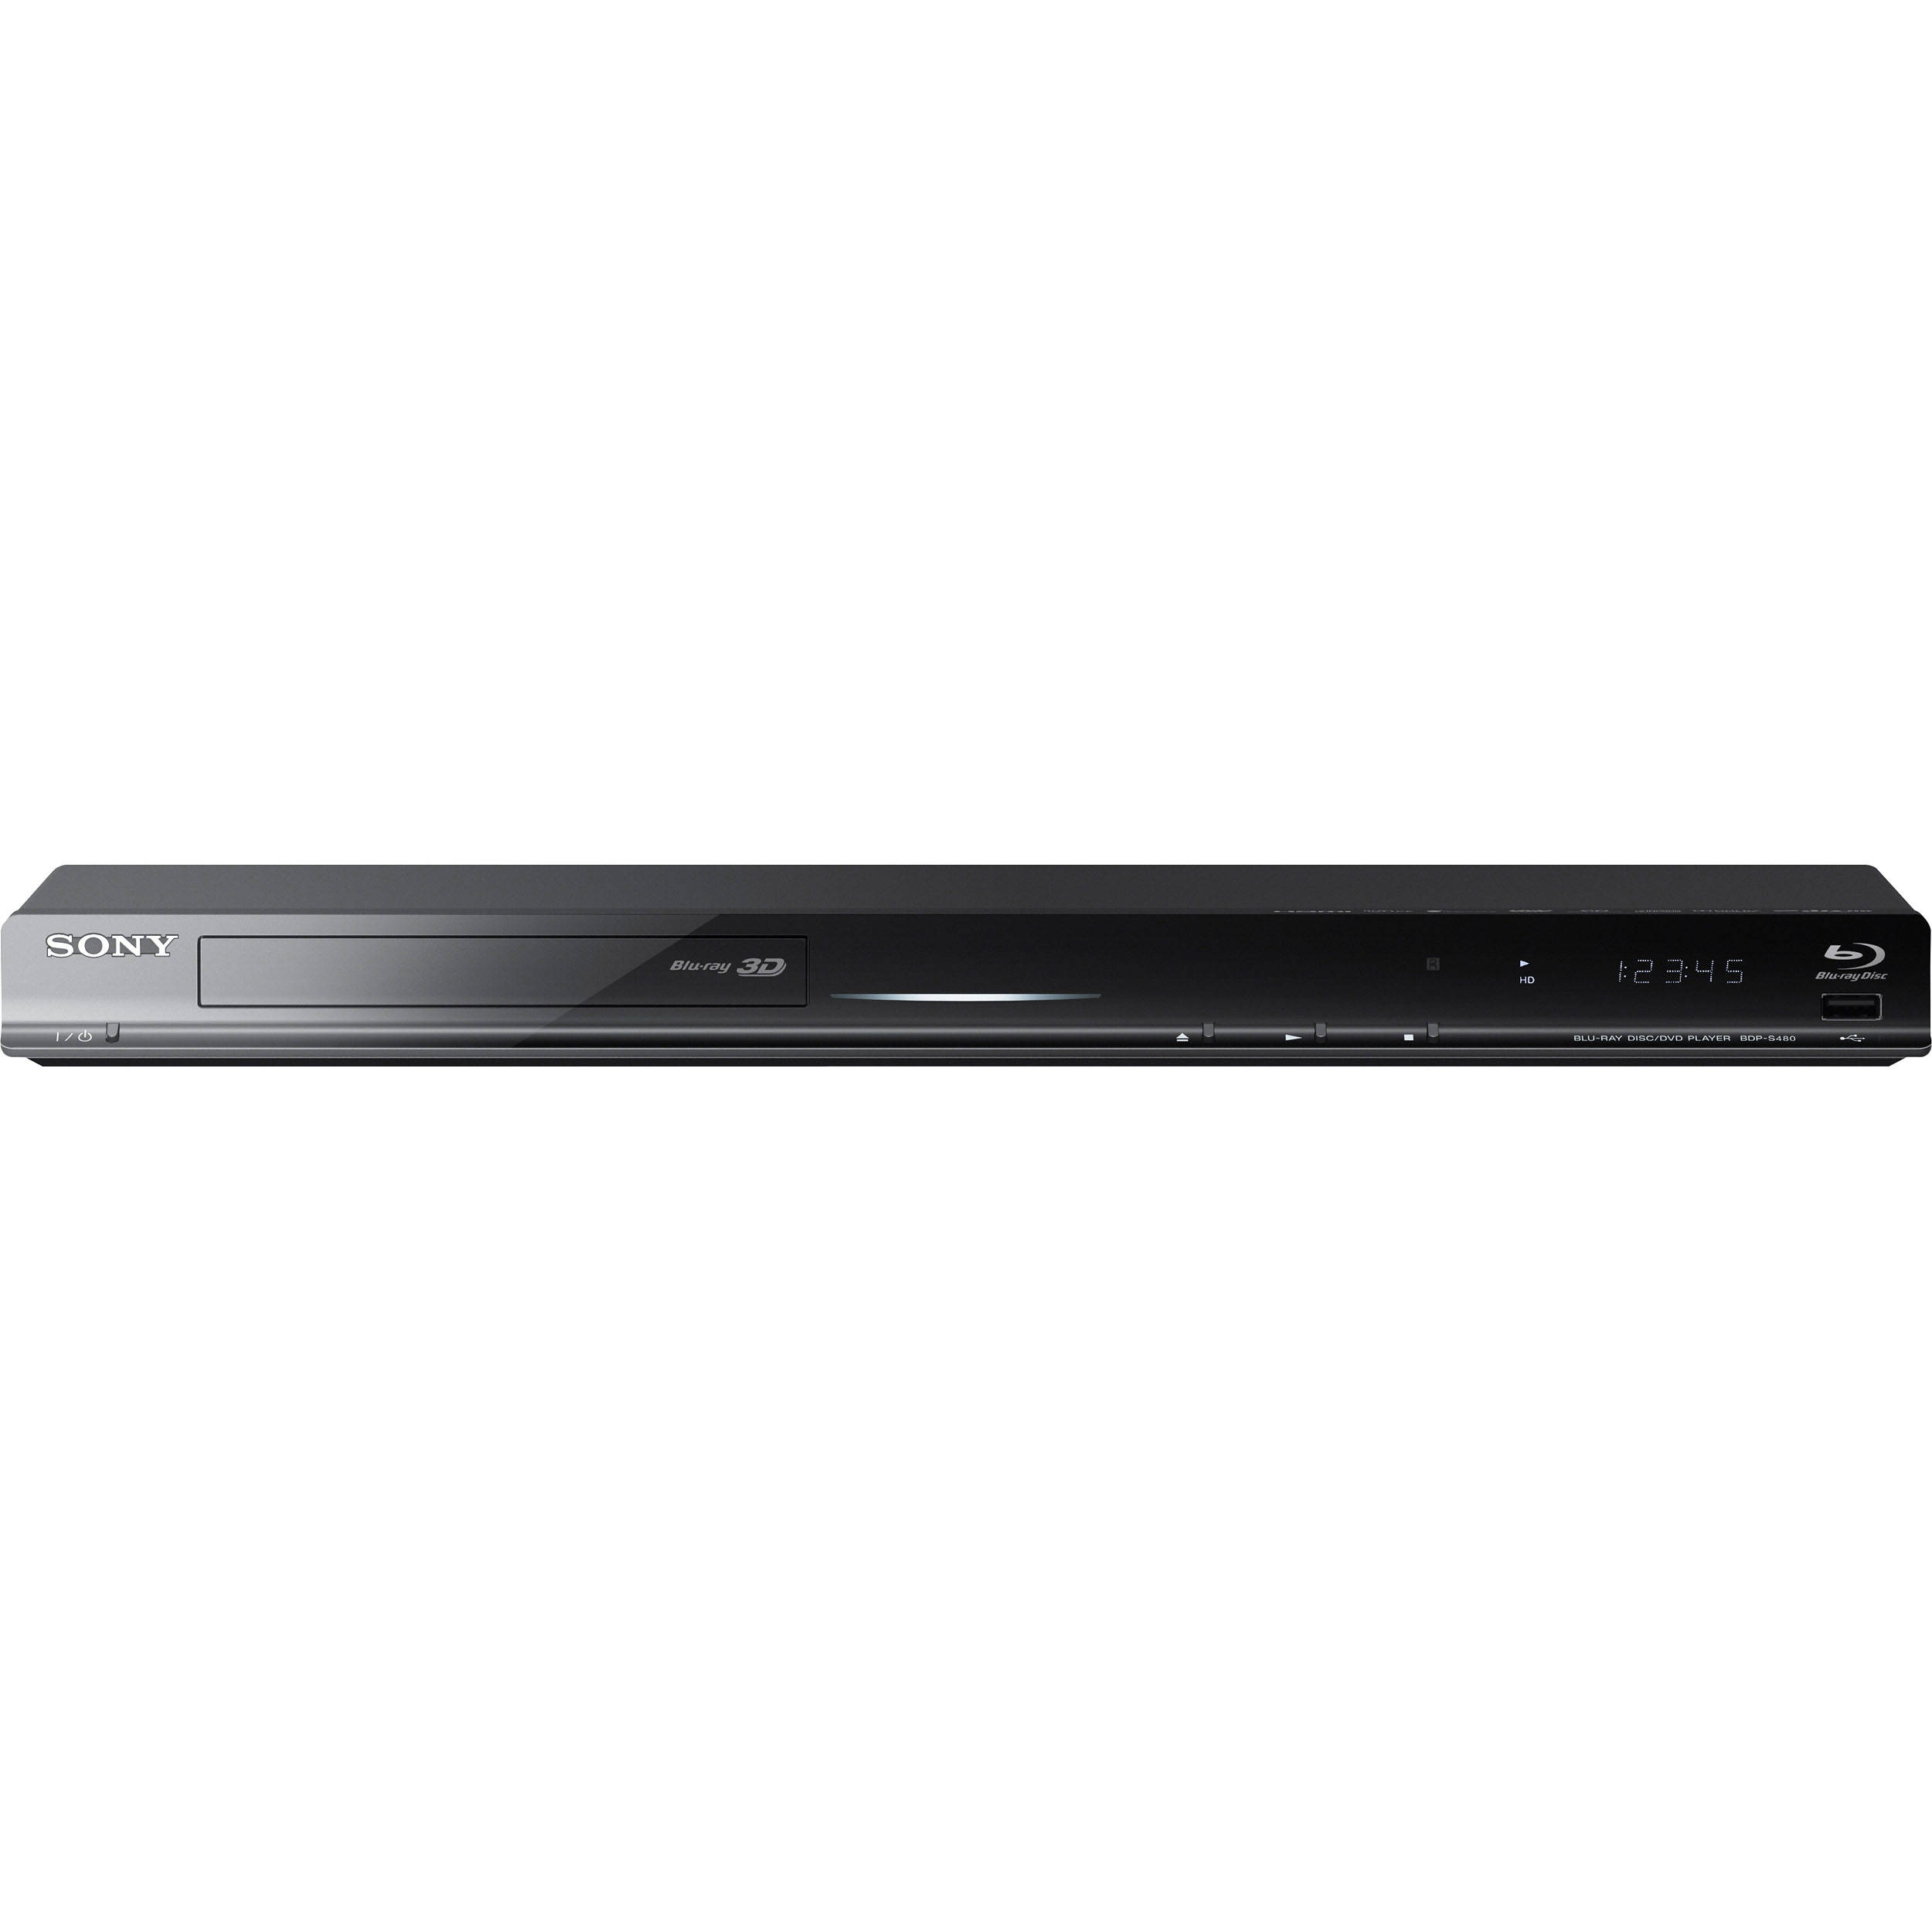 Sony p S480 3d Blu Ray Disc Player ps480 B H Photo Video